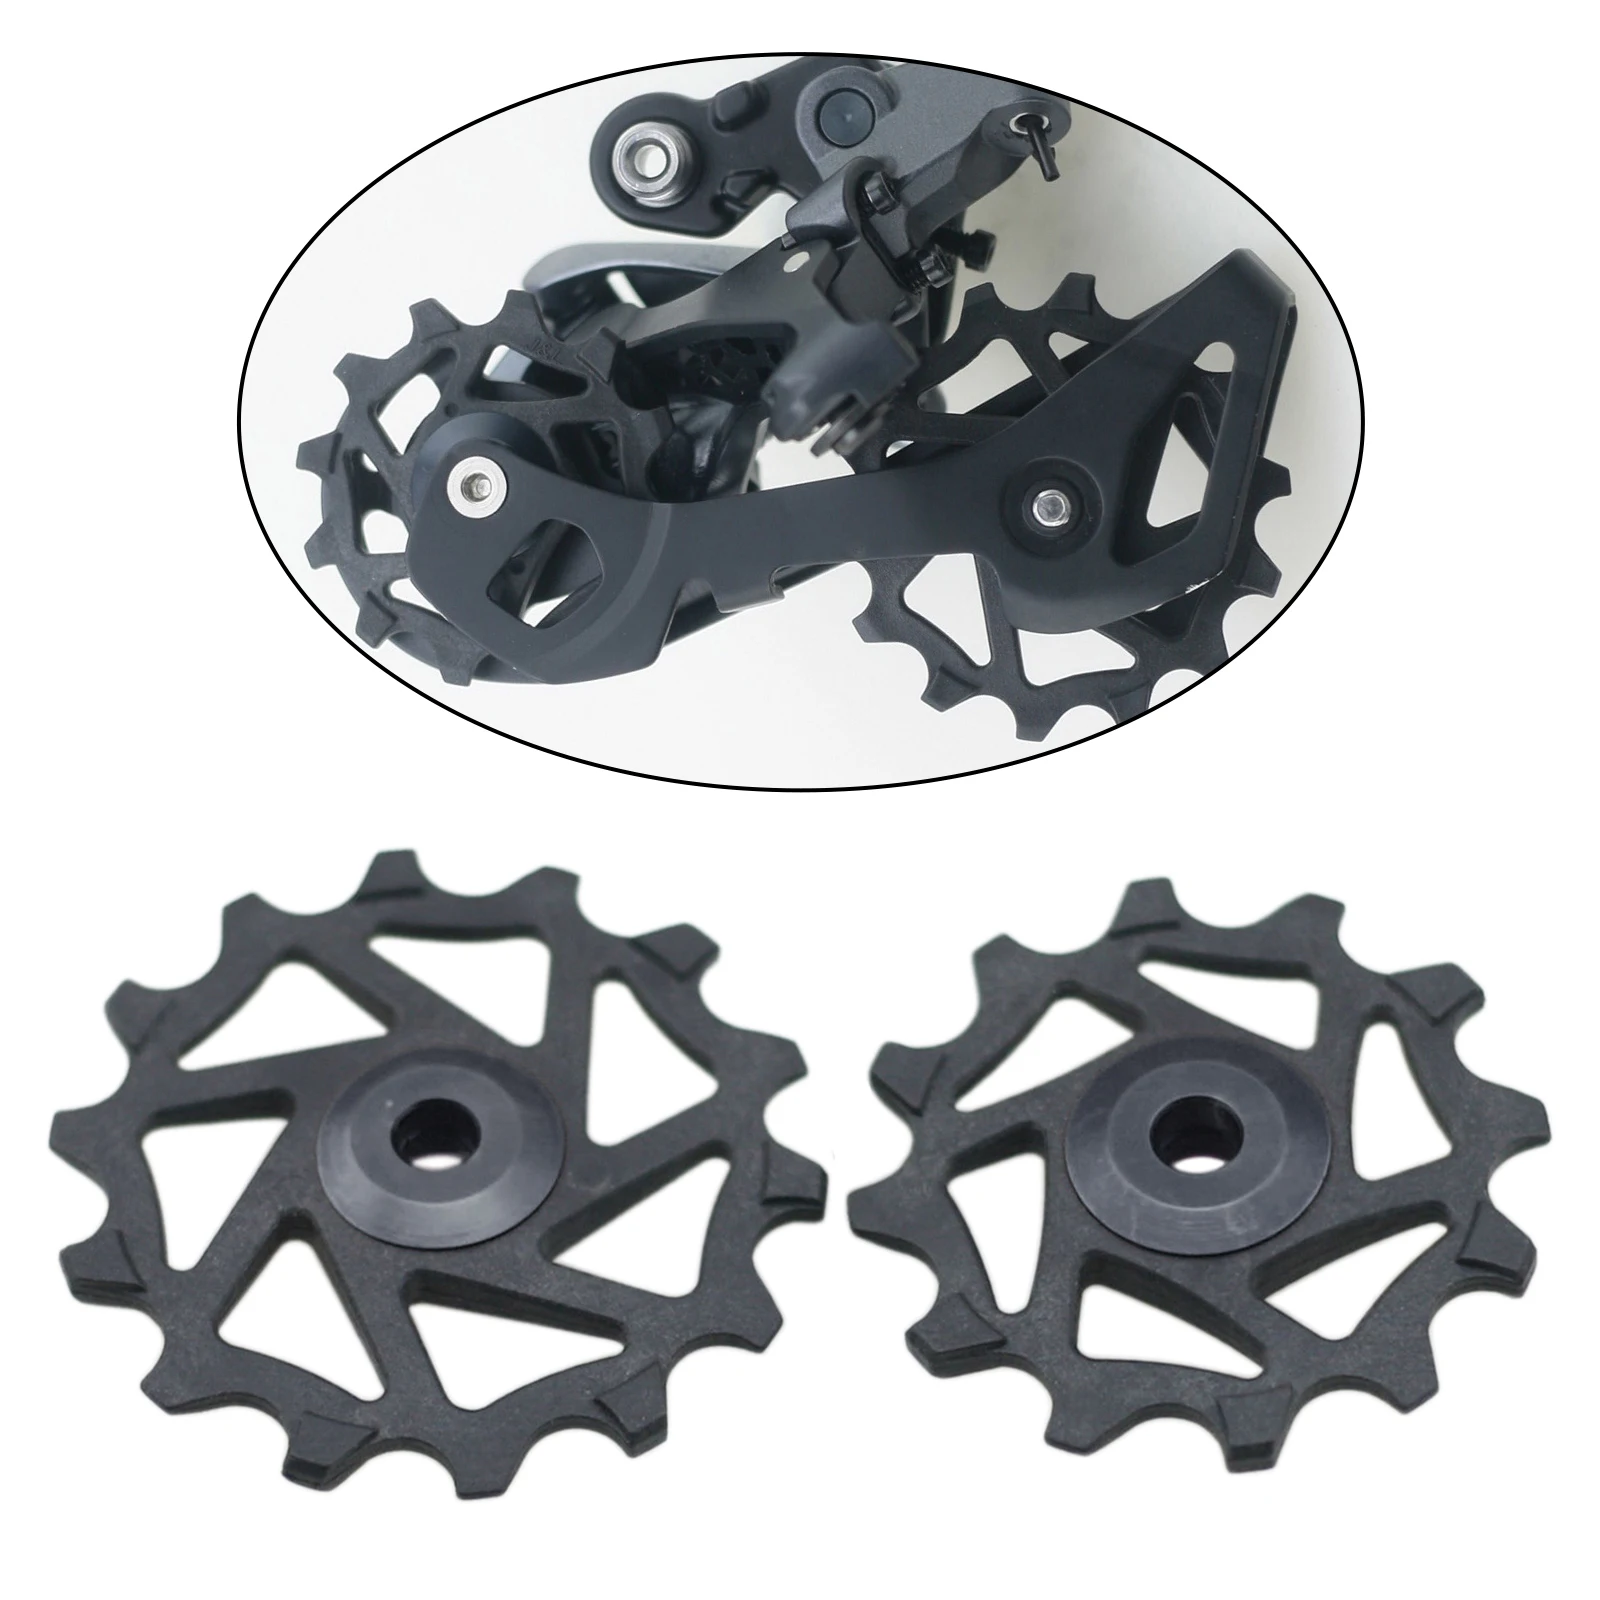 1 Pair 12T 14T bike Ceramic Rear Derailleur Pulley Jockey For XX1 X01 Bike Upgrade MTB Mountain Road Bicycles Replace Parts